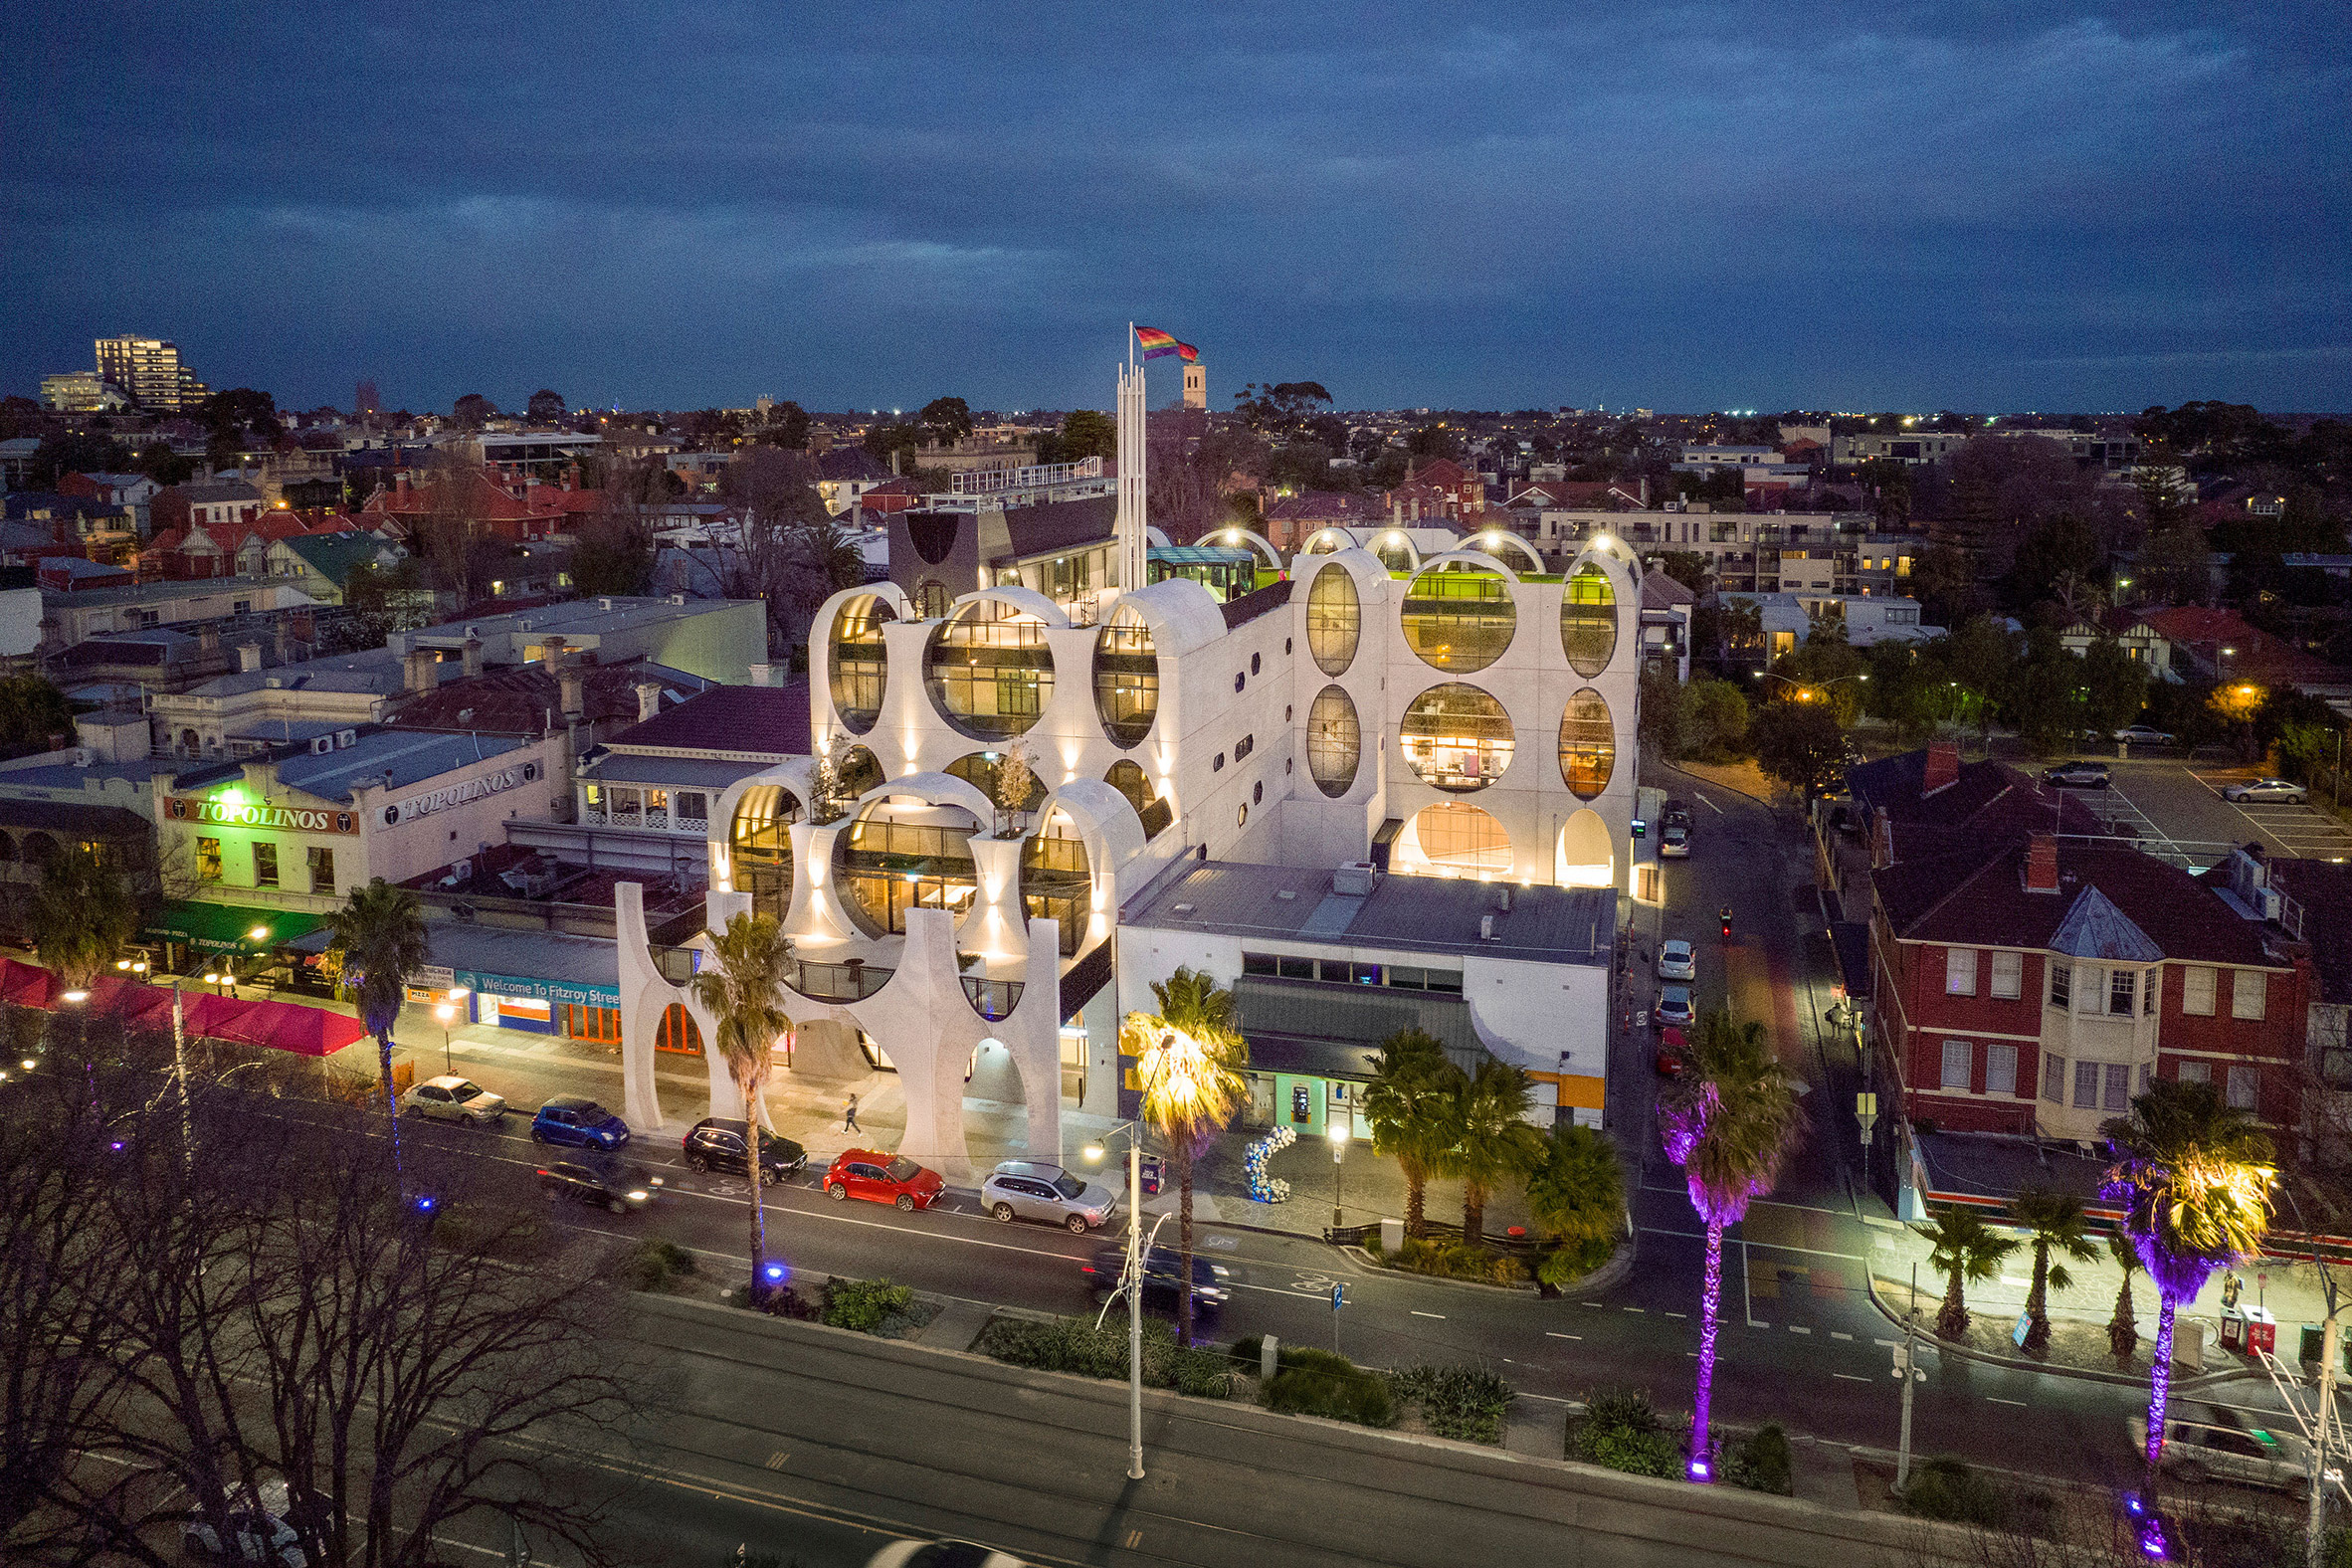 Aerial image of The Victorian Pride Centre lit at night